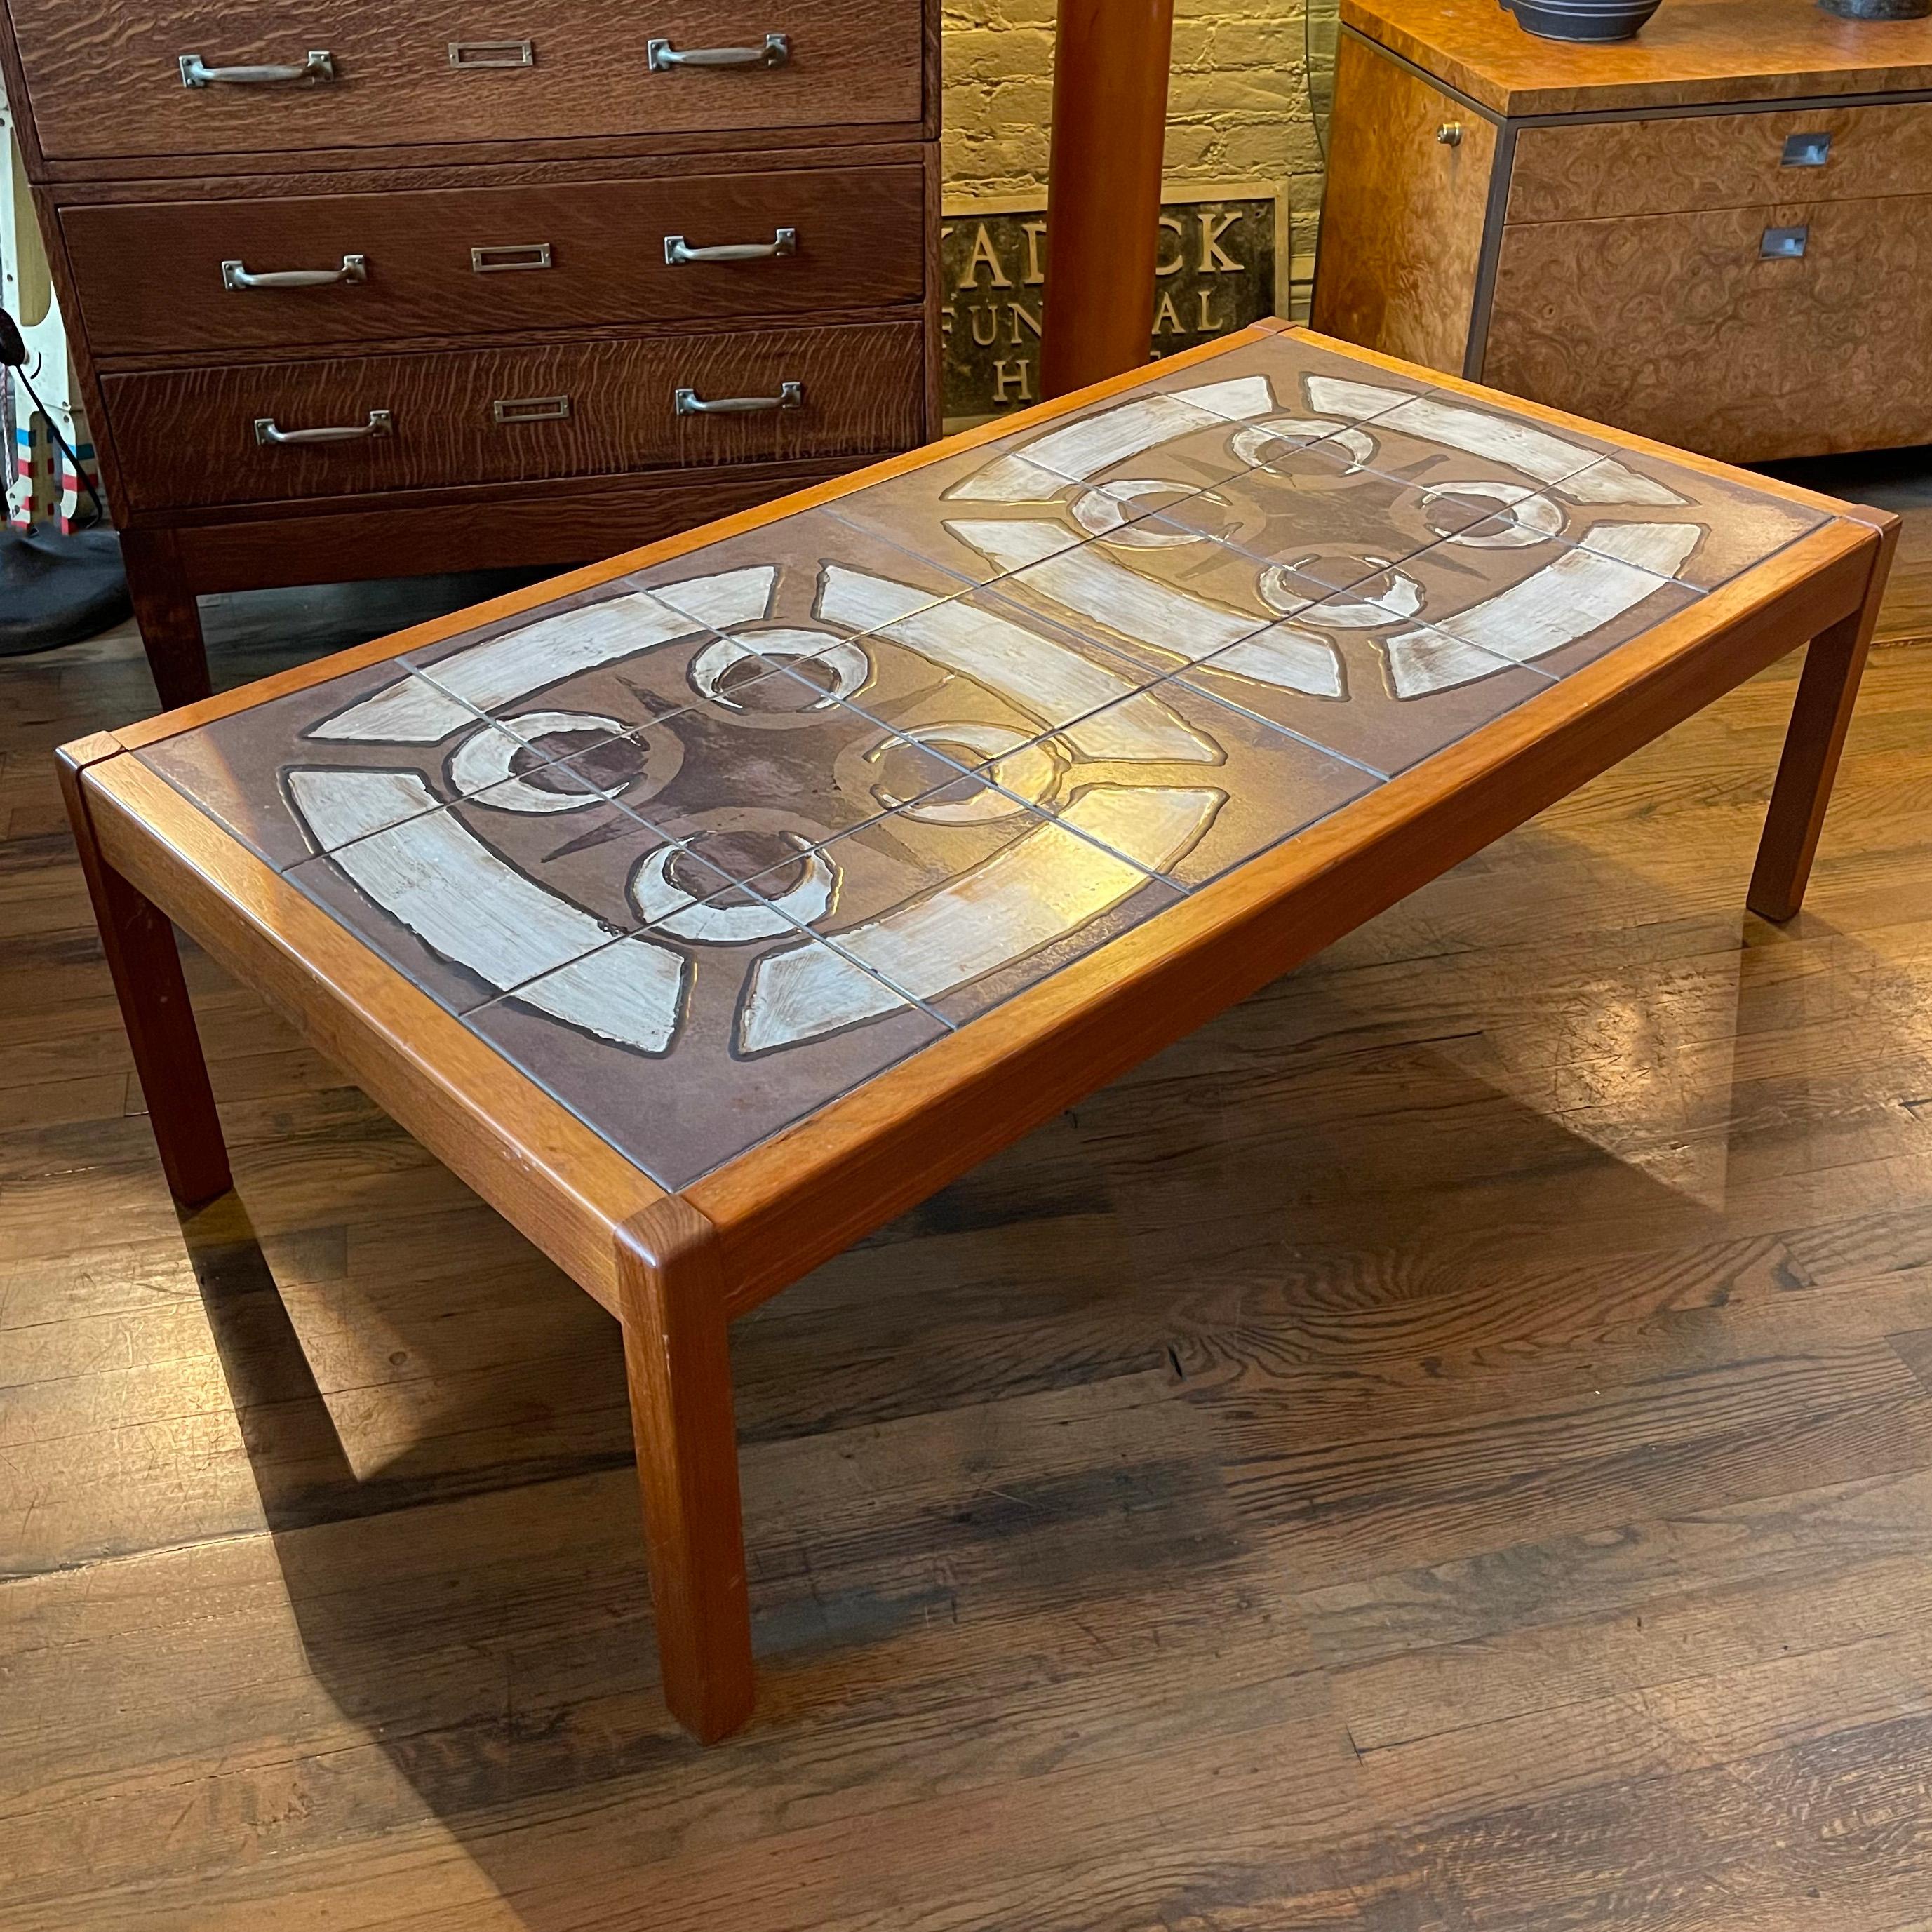 Large, Danish modern, coffee table features a hand-painted, ceramic, tile top framed in teak.